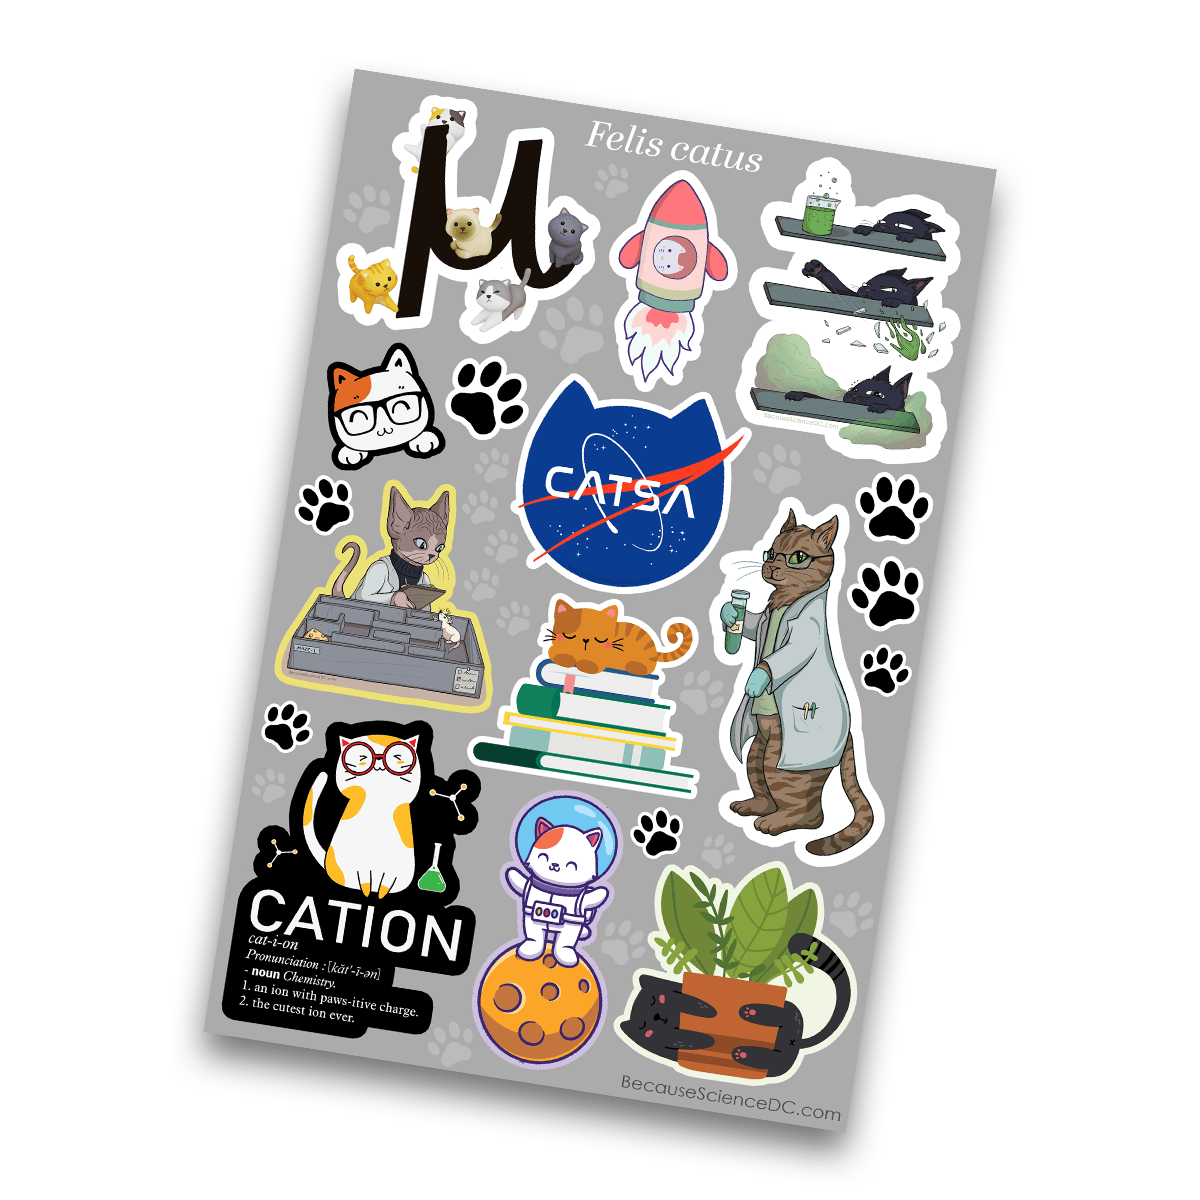 Image of a 4x6 vinyl sticker sheet with a science cats theme